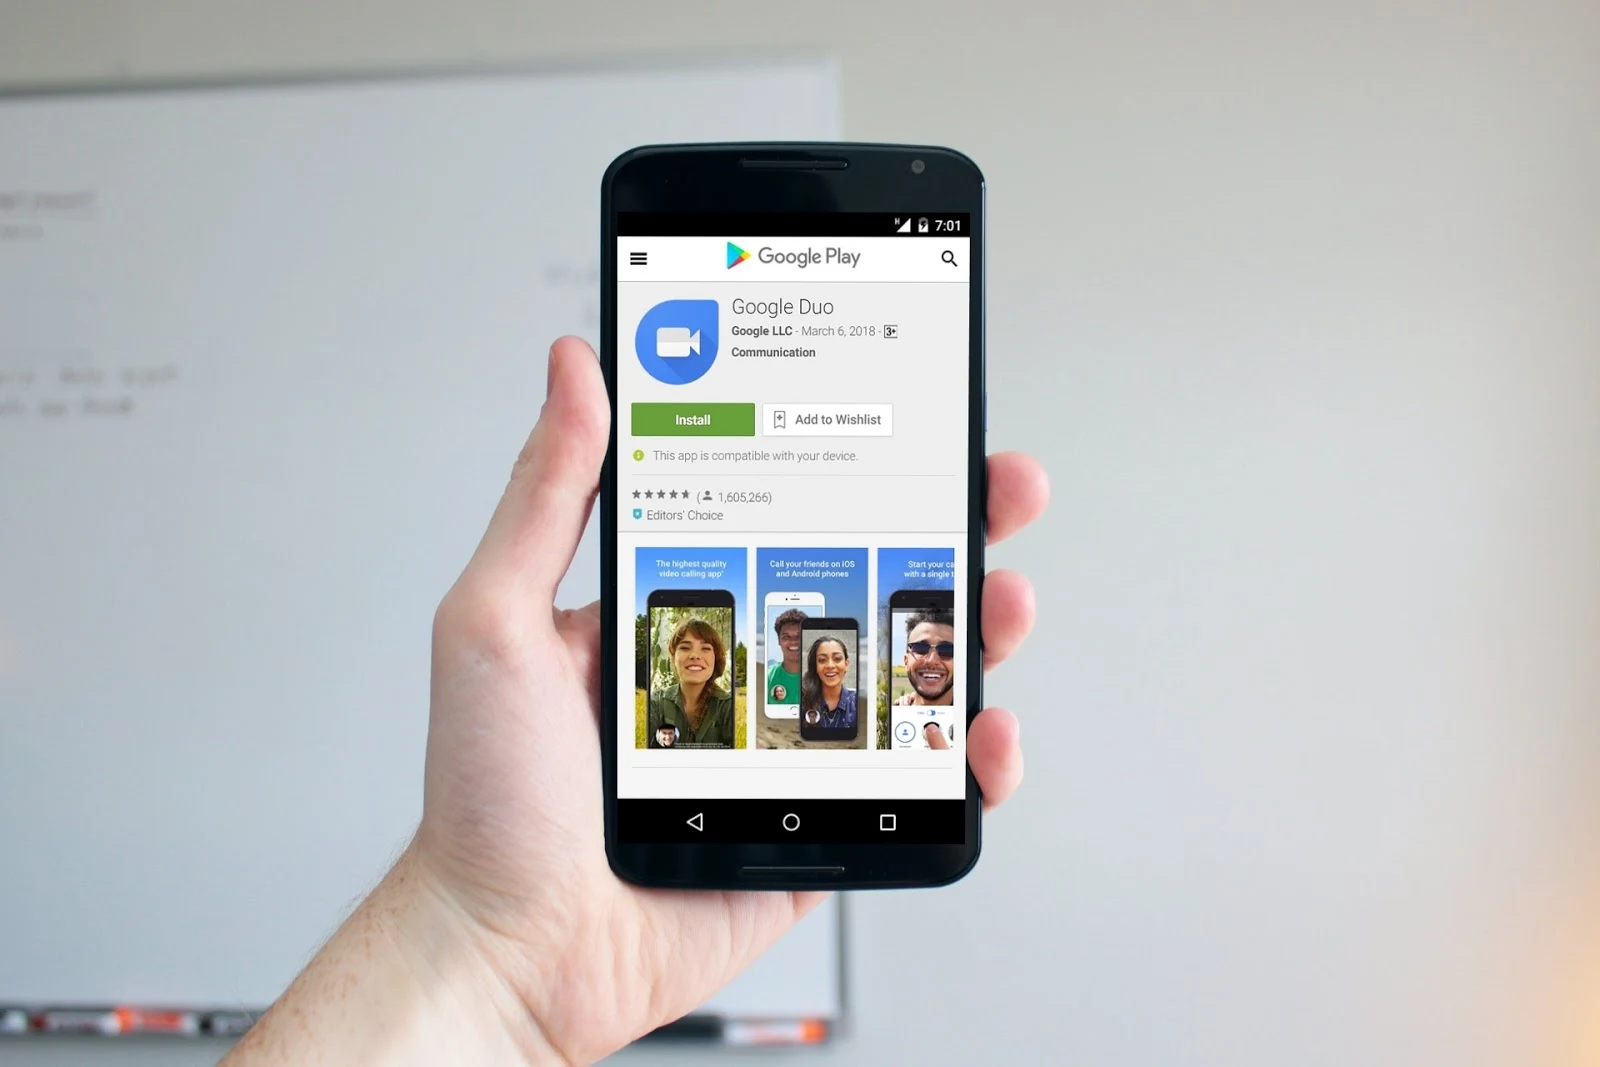 With Google Duo you can now leave voice and video messages when nobody picks up your call (or politely declines to talk to you).